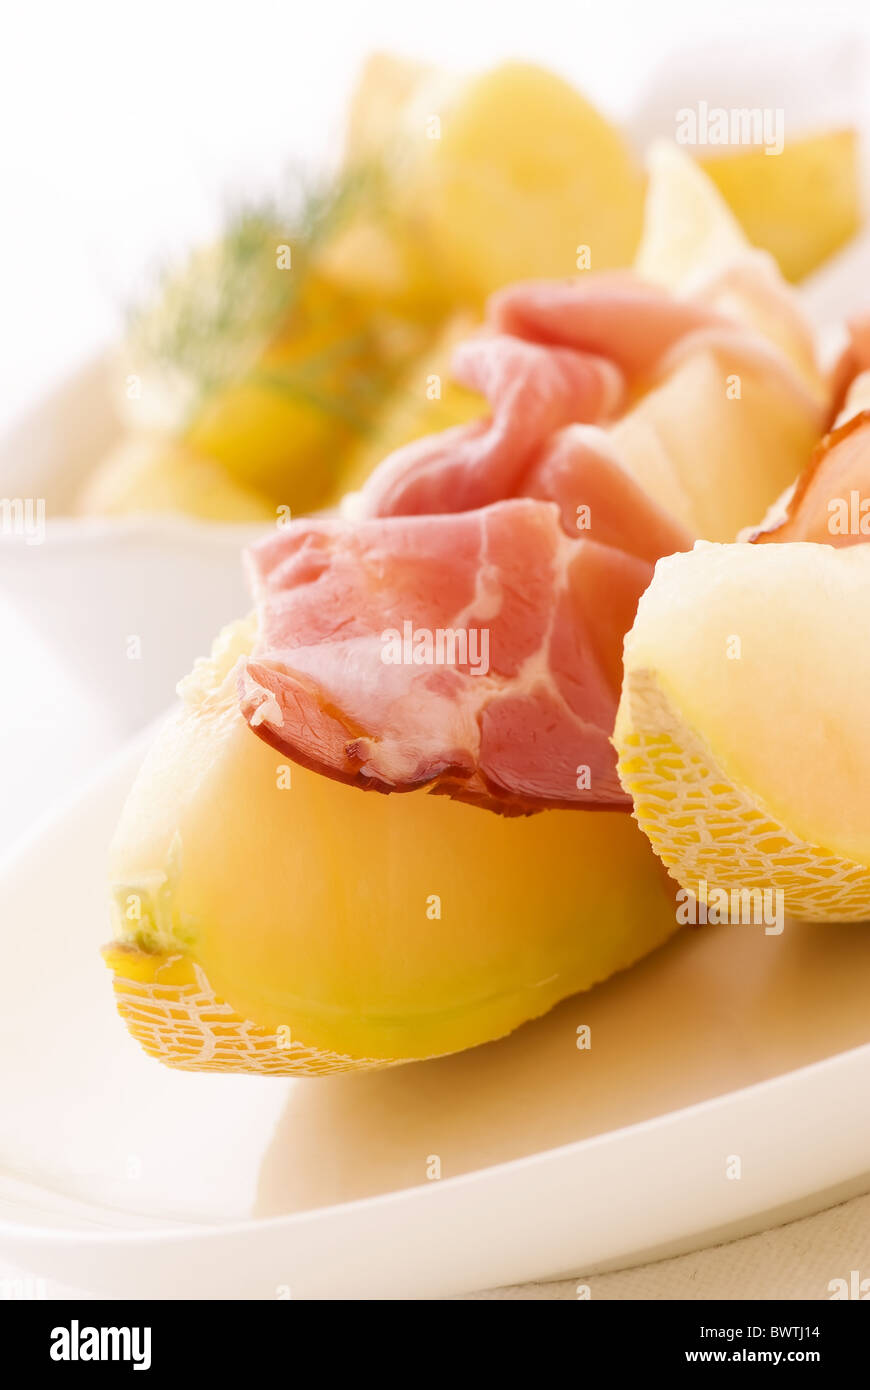 Rock melon with gammon and potatos as closeup on a white plate Stock Photo